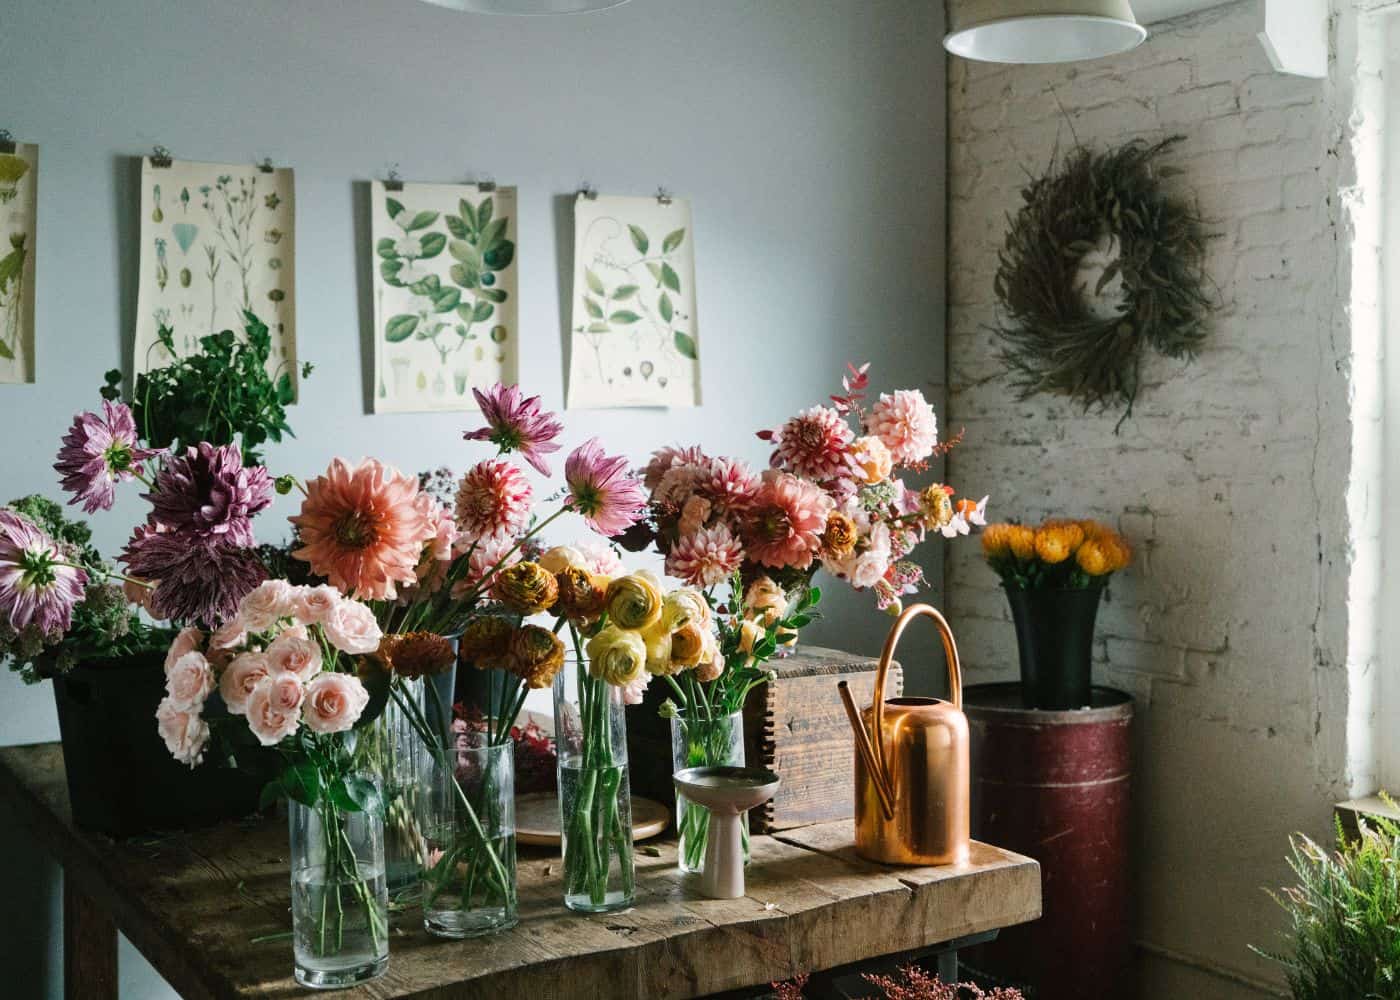 Decorating With Flowers: 10 Flower Decorating Ideas